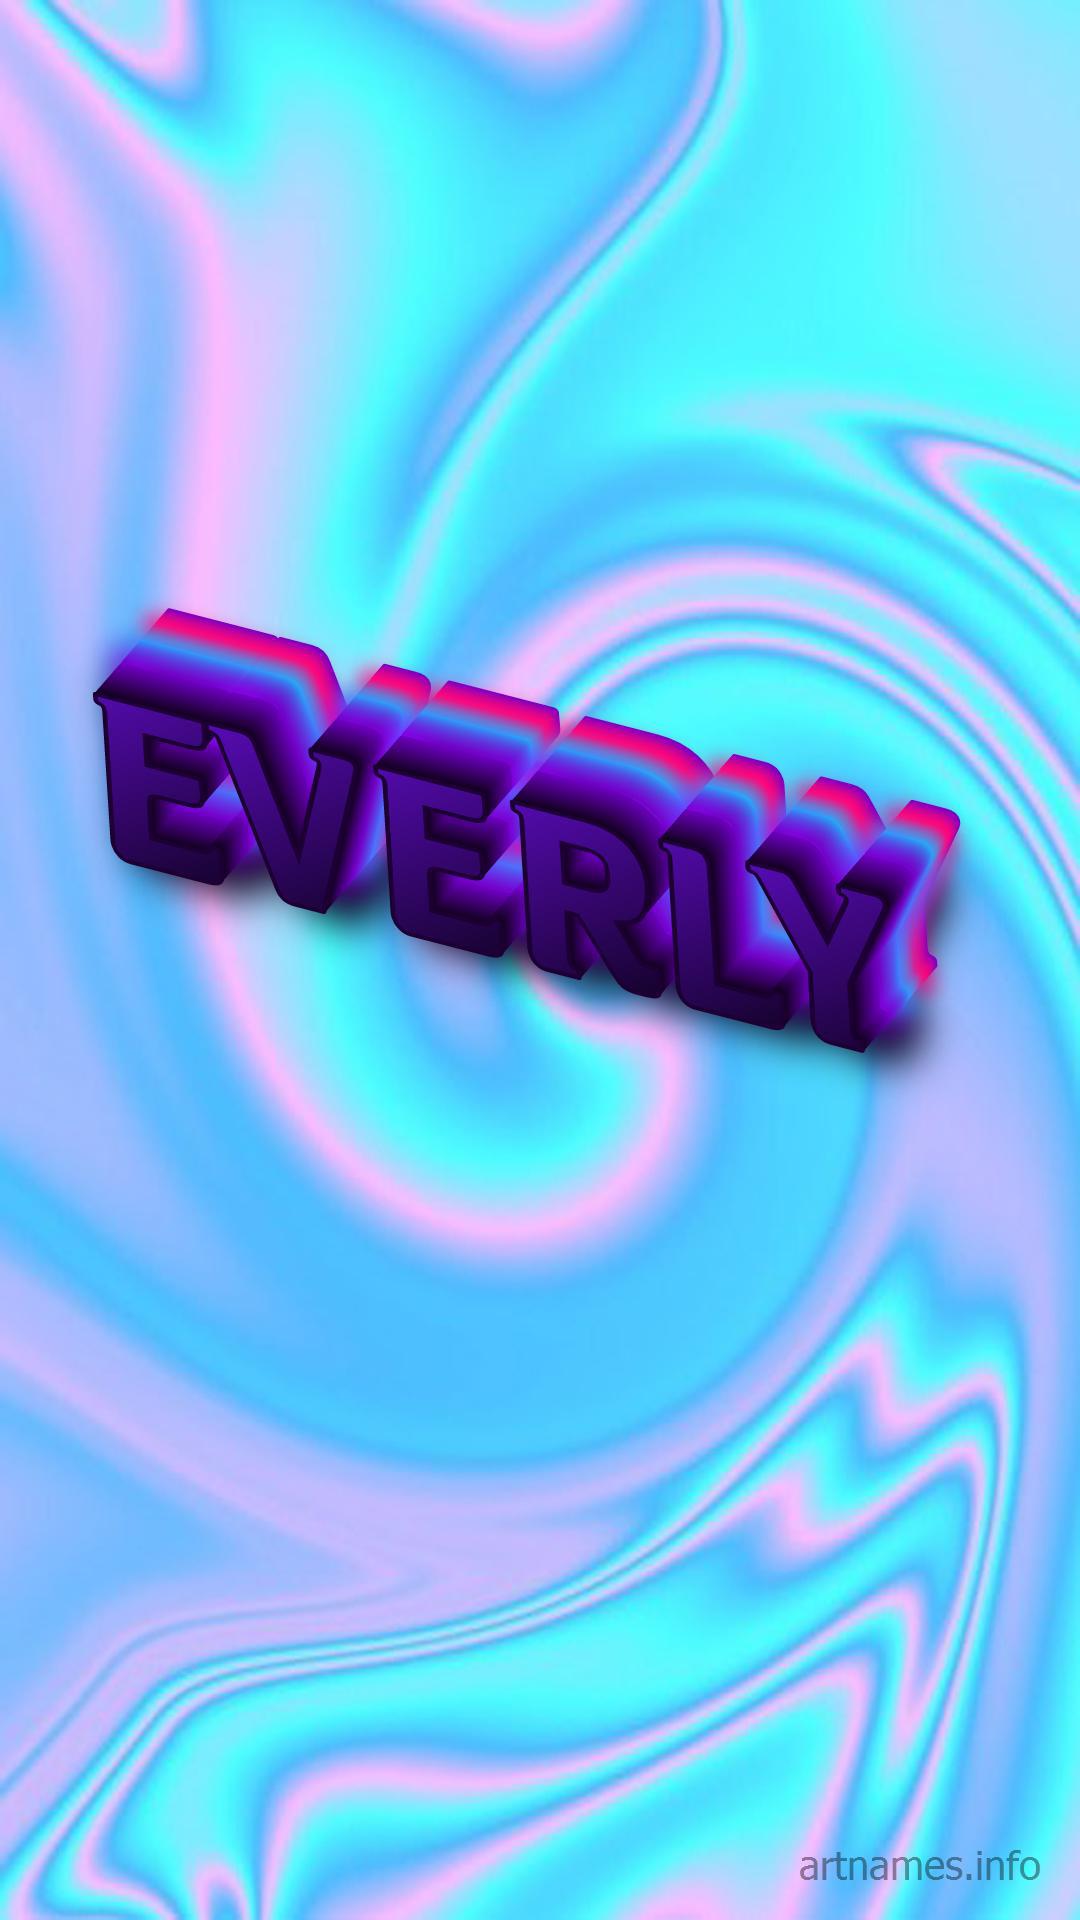 Everly Wallpapers